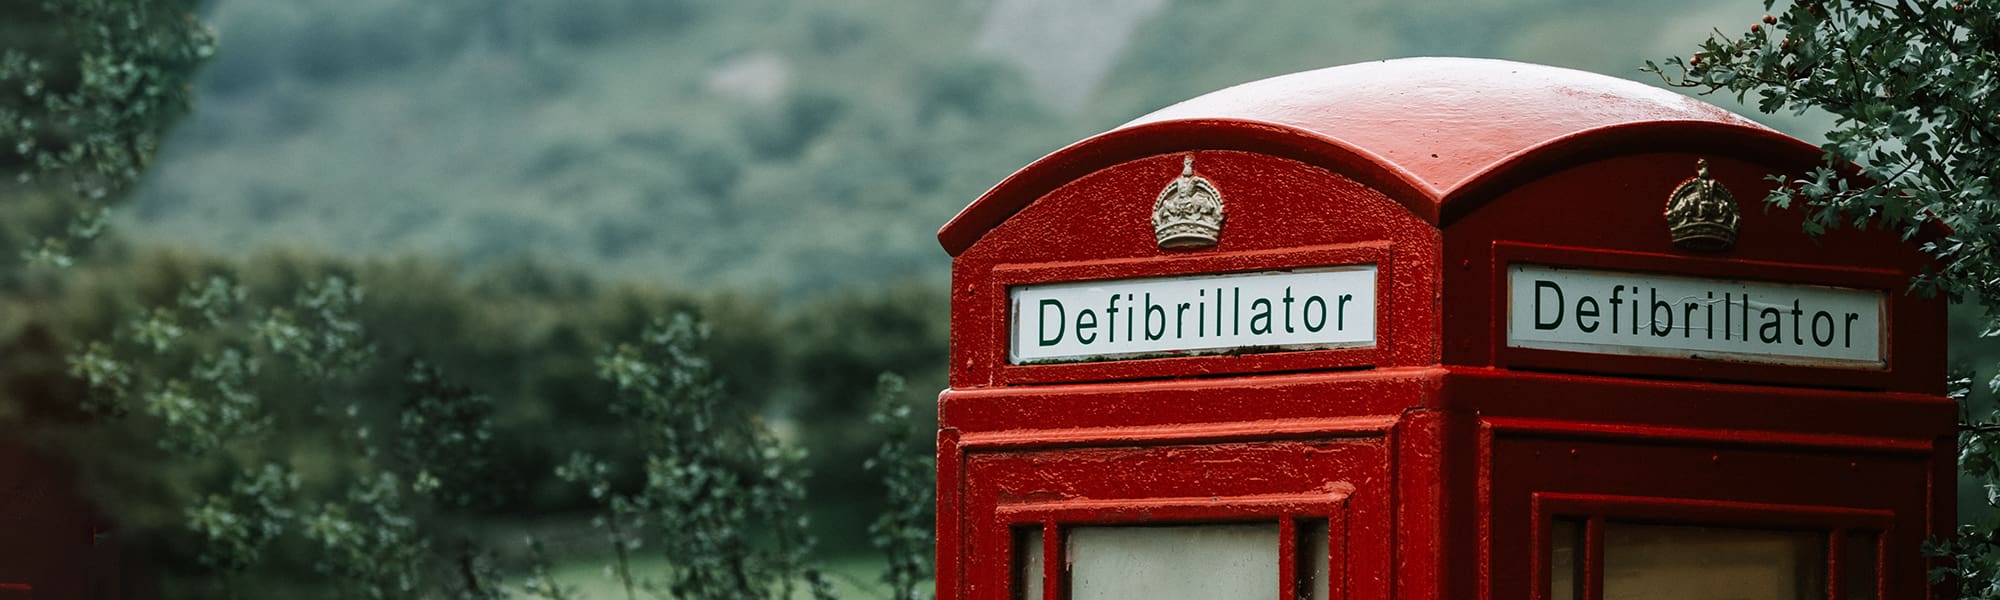 A picture of a telephone box with the word Defibrillator across the top, greenery in the background